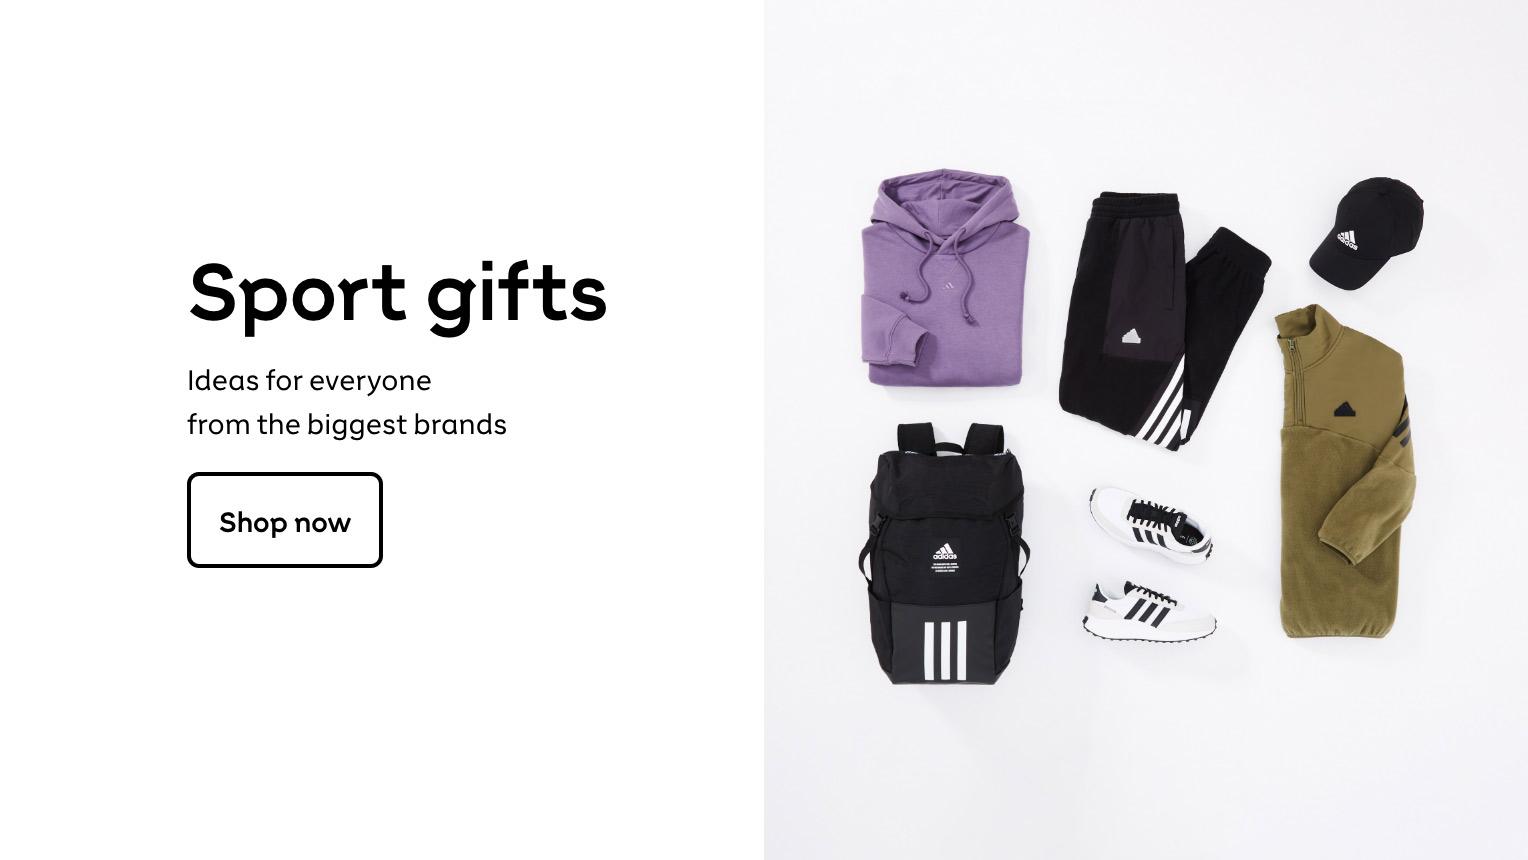 Sport gifts
Ideas for everyone
from the biggest brands
Shop now